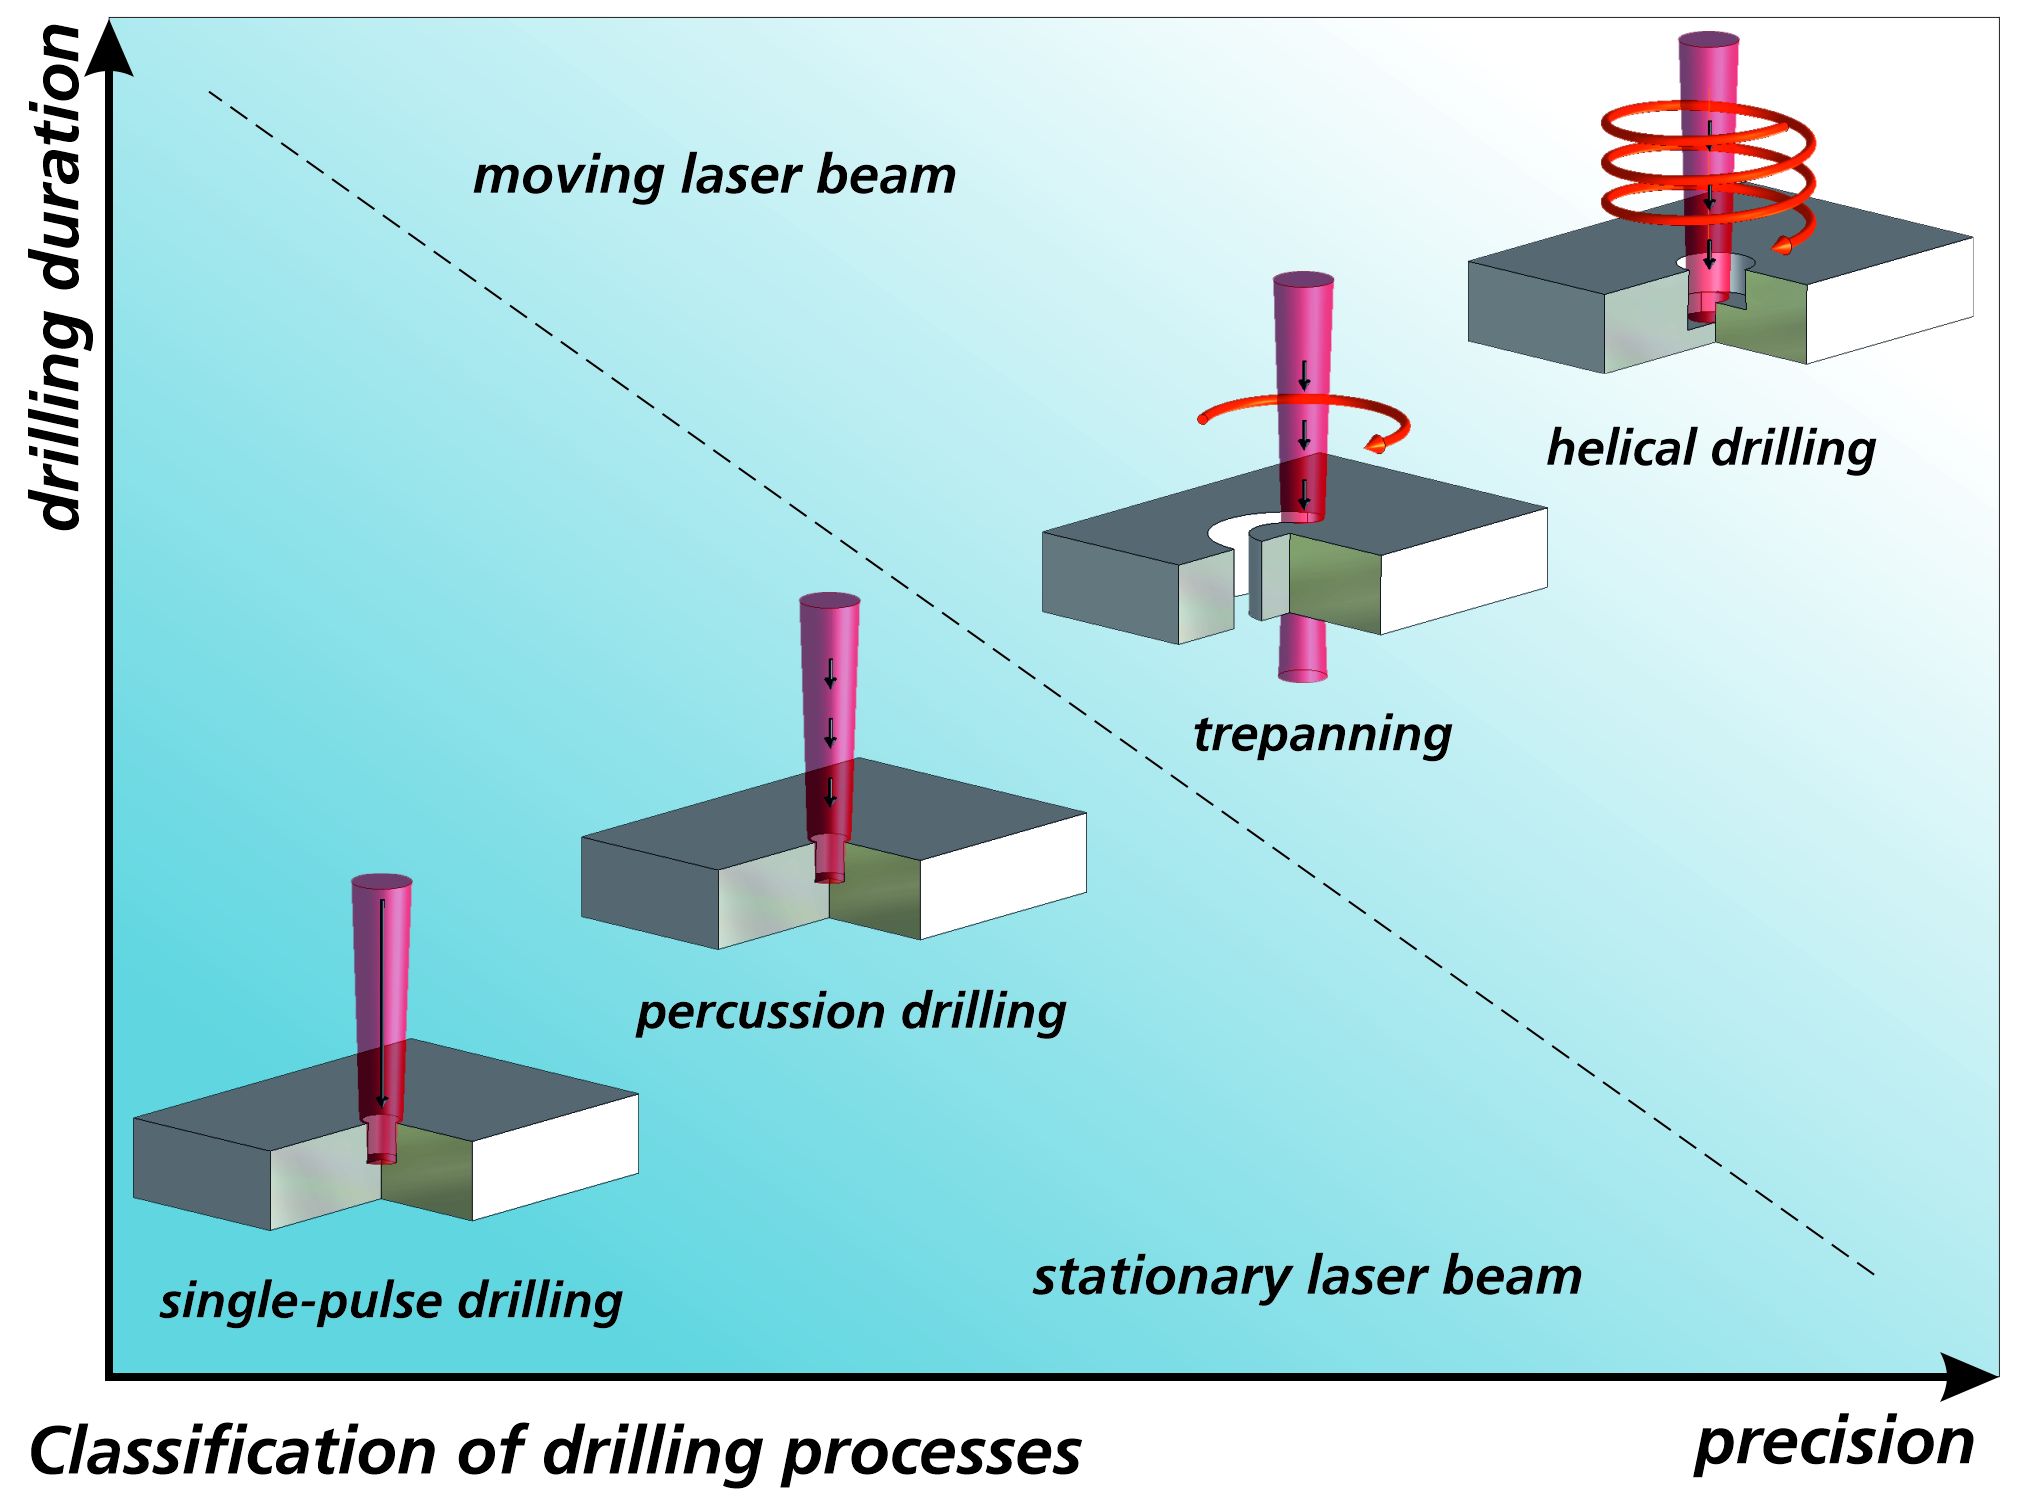 The various laser drilling processes can be classified according to precision and drilling speed.